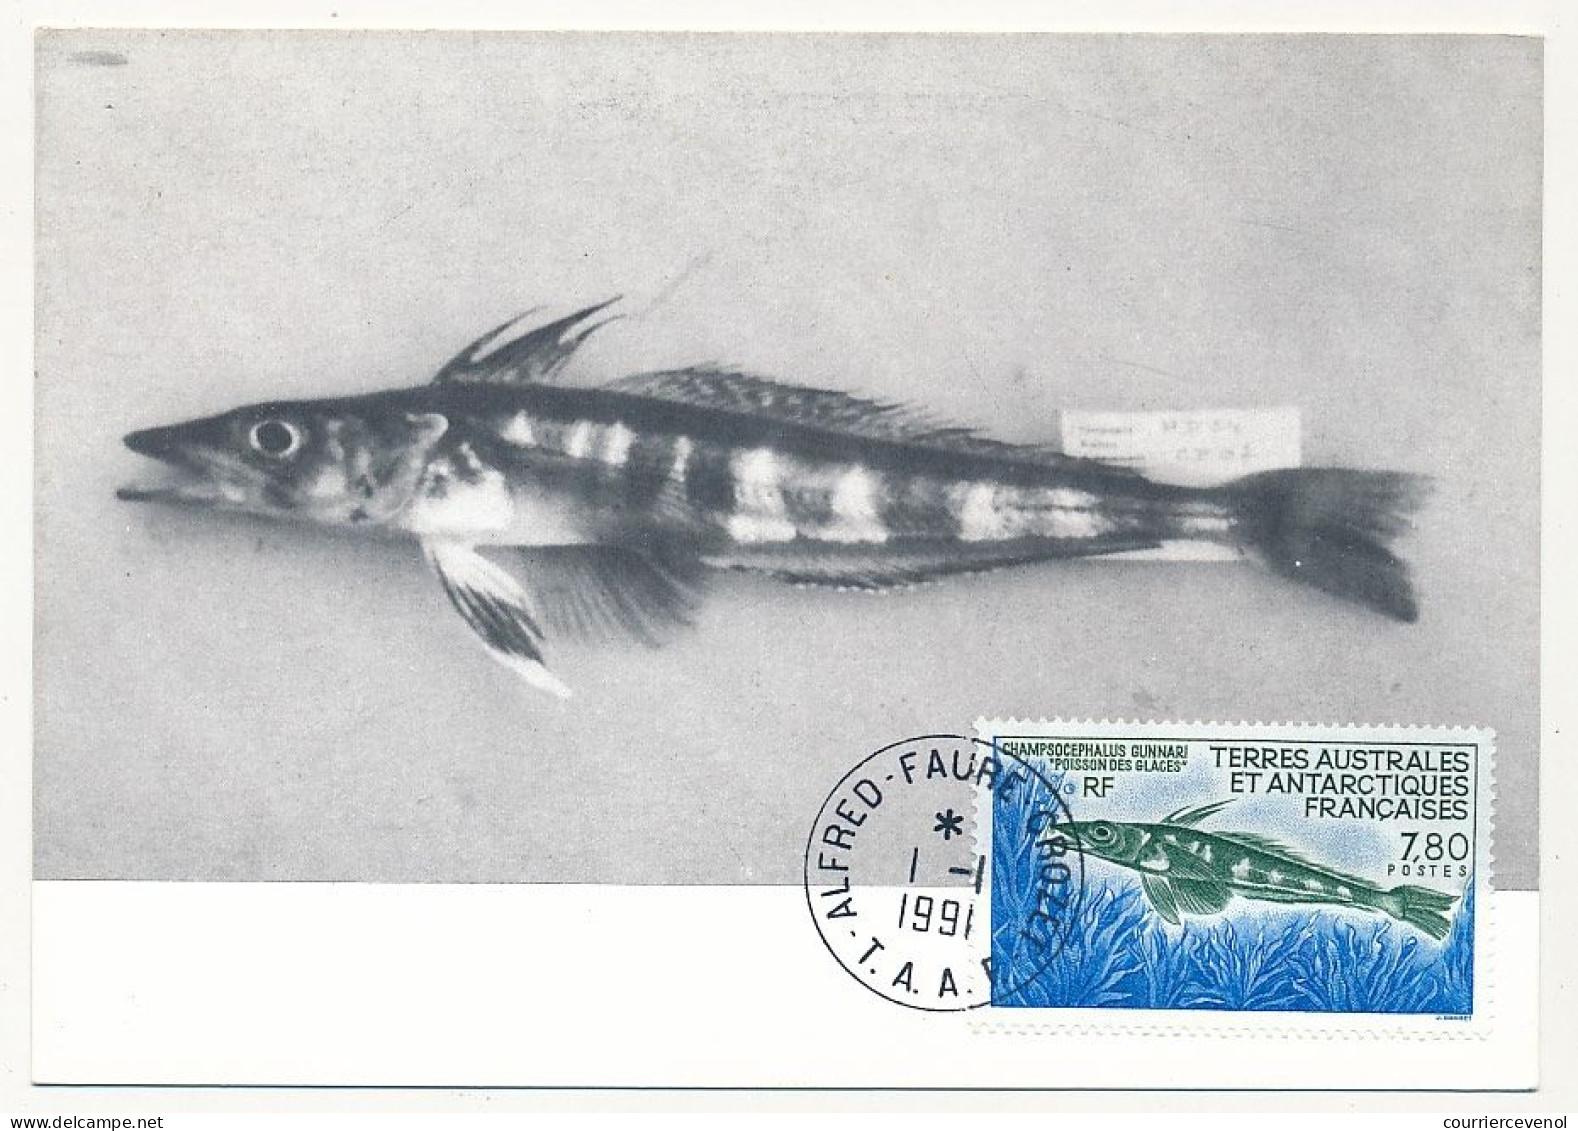 TAAF - Carte Maximum 7,80F Poisson Des Glaces - Alfred Faure Crozet - 1/1/1991 - Covers & Documents